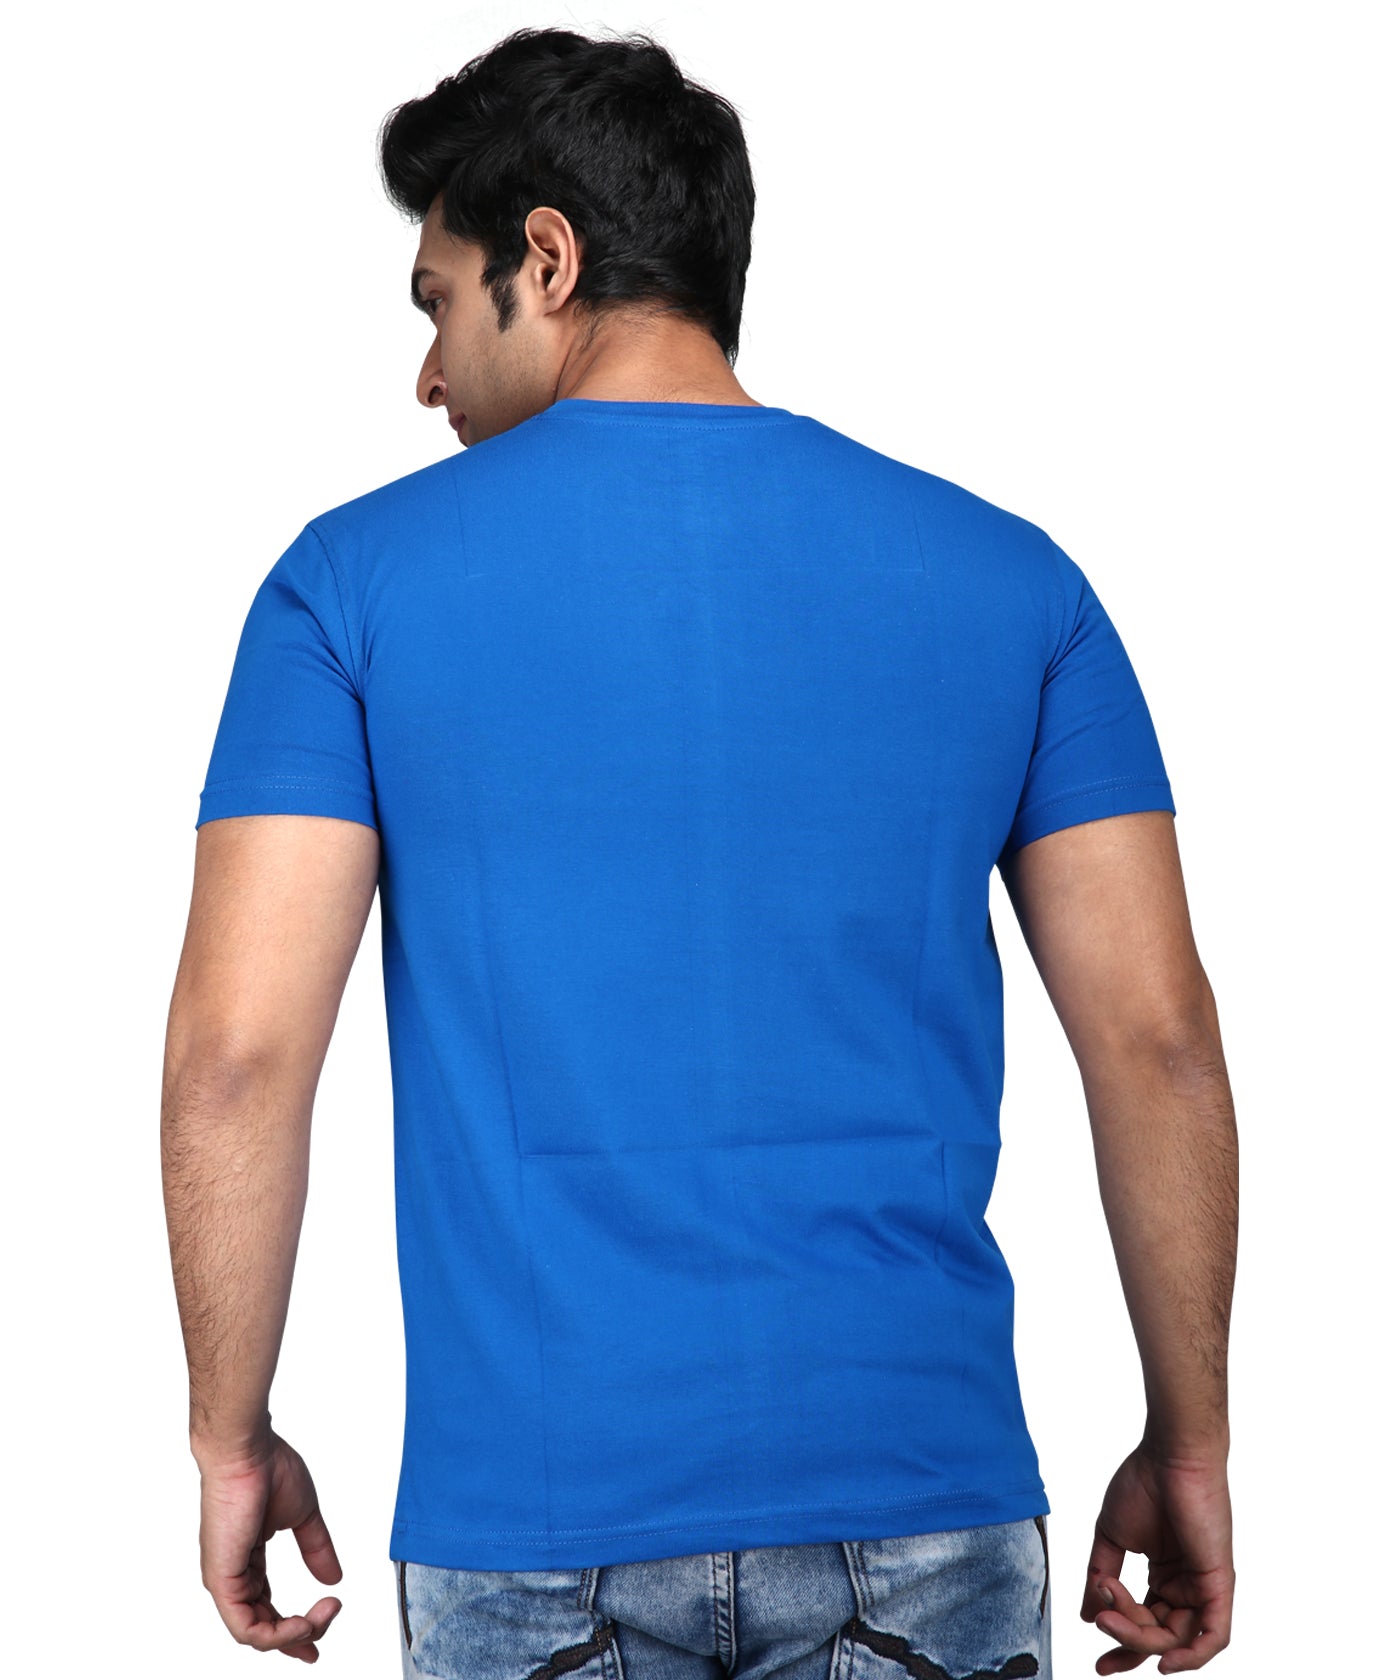 Google Answers - Premium Round Neck Cotton Tees for Men - Black And Electric Blue